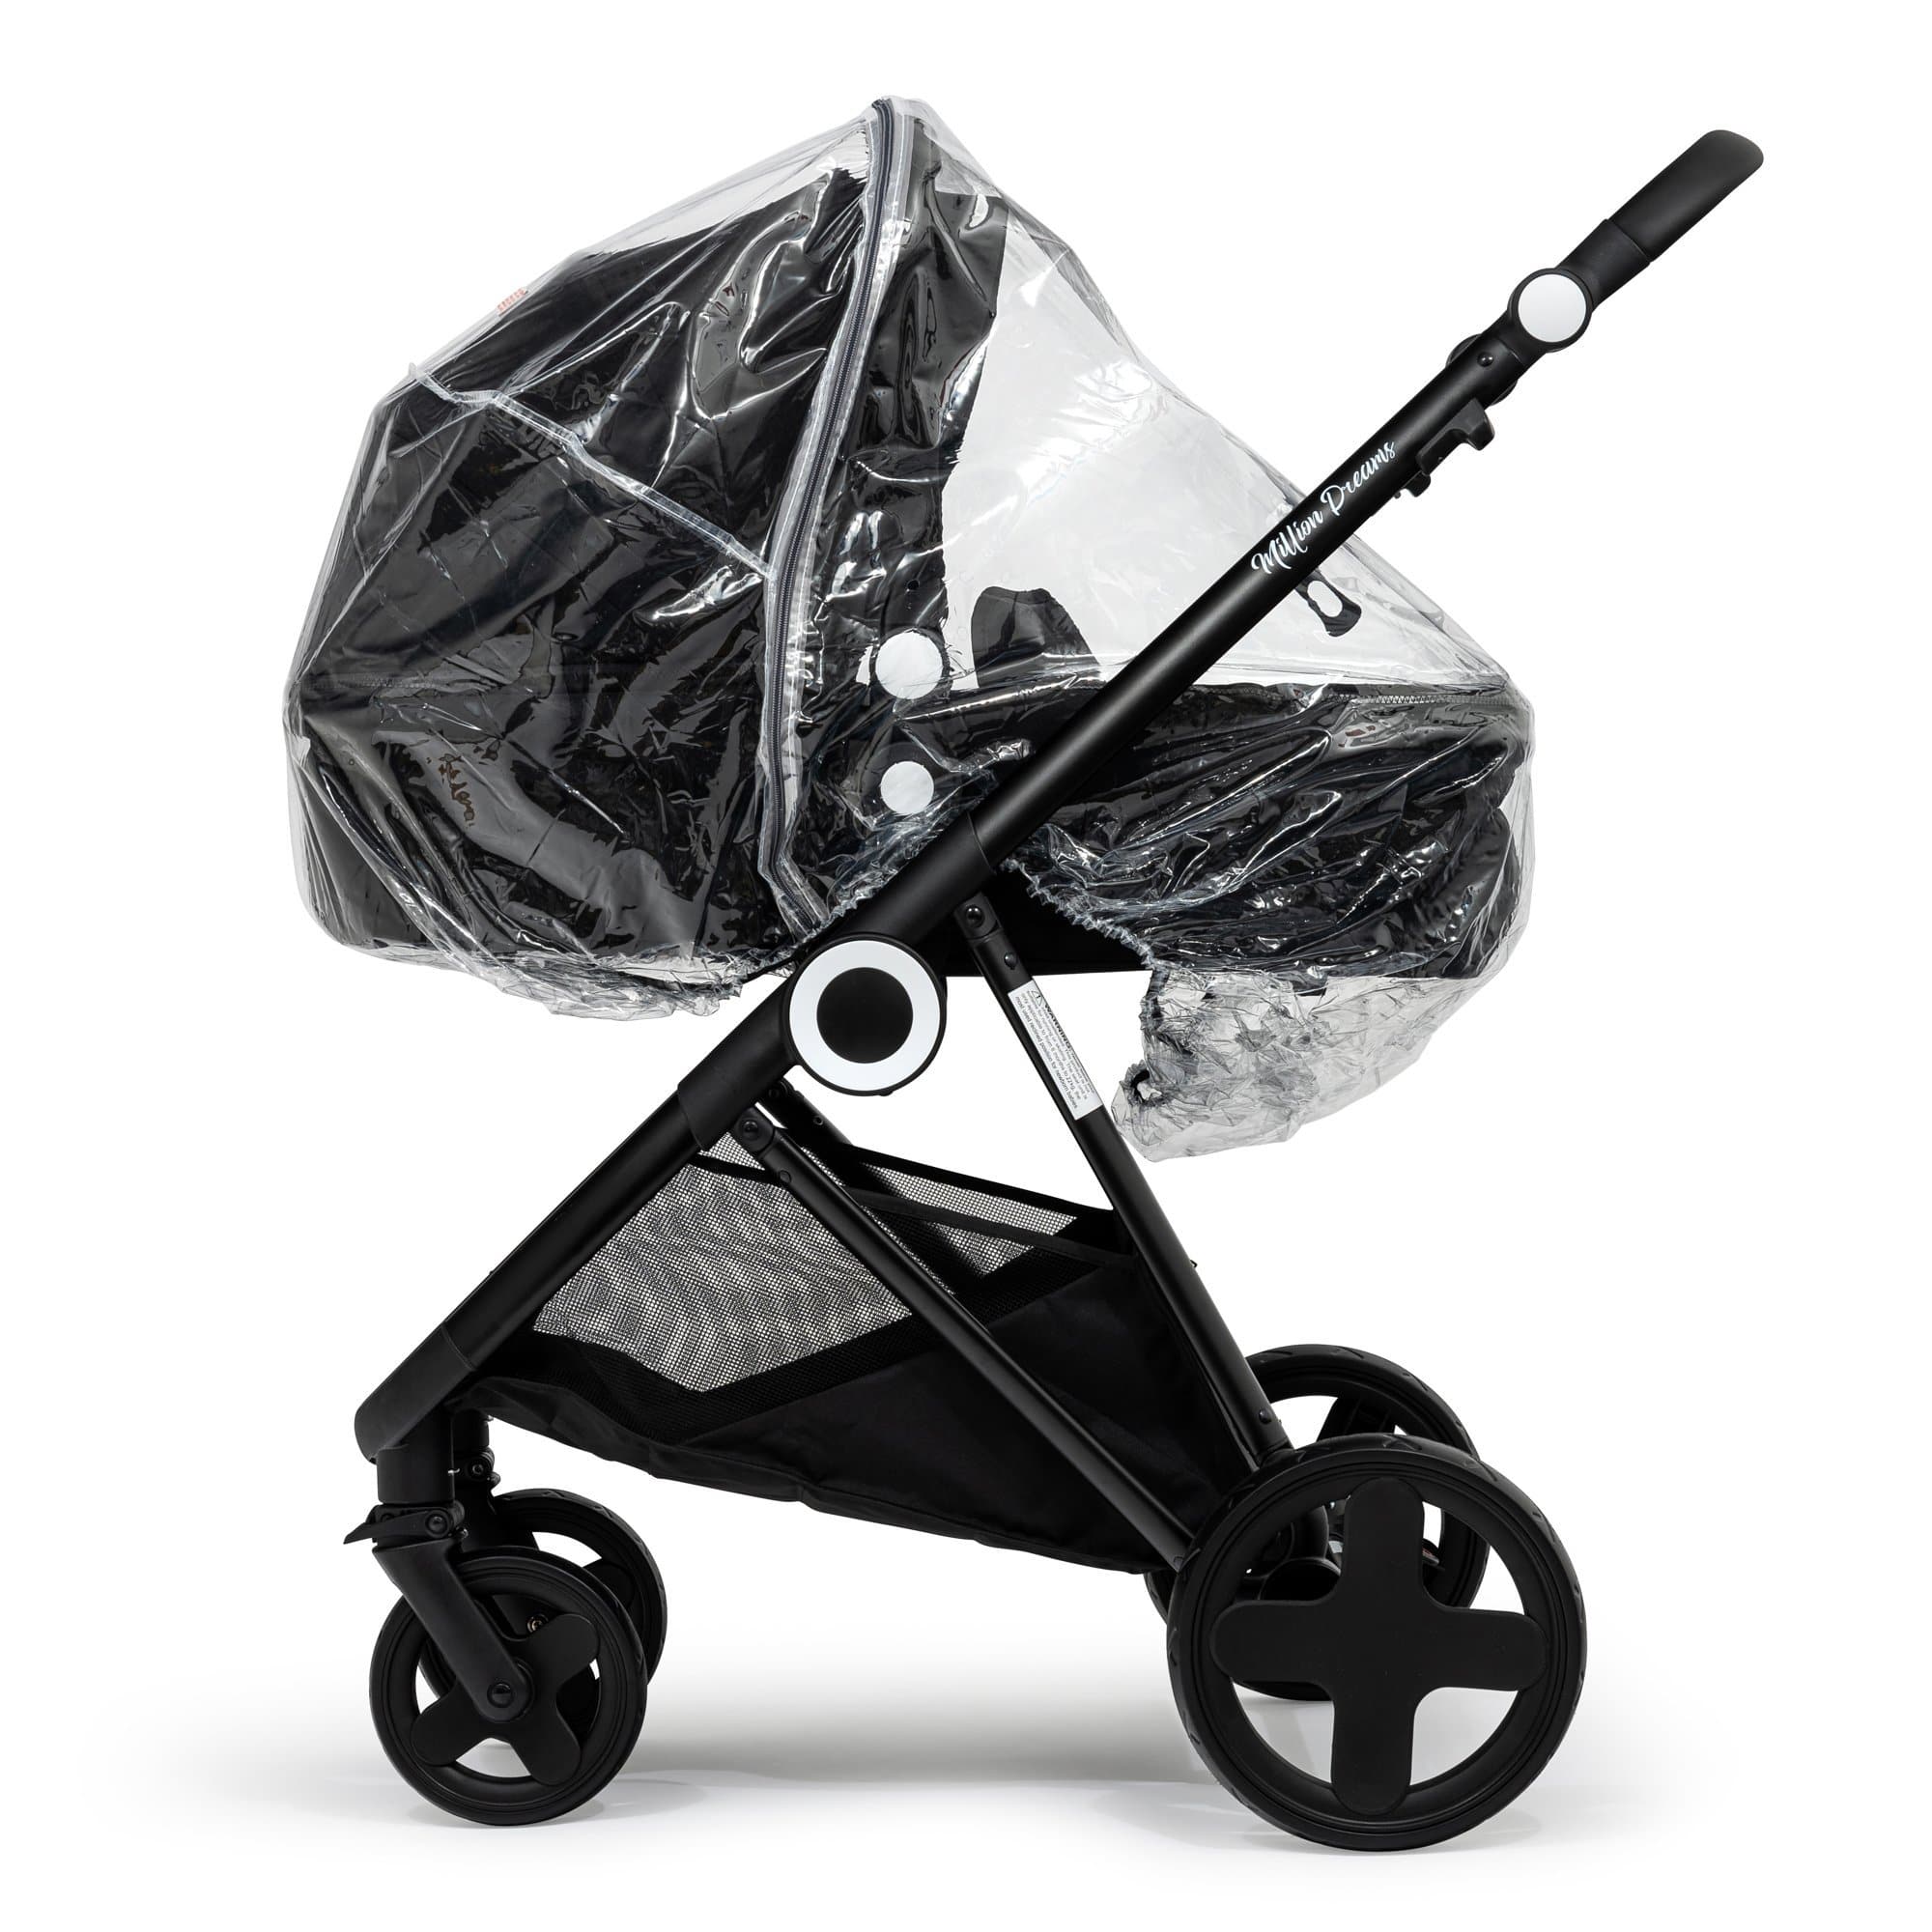 2 in 1 Rain Cover Compatible with Seed - Fits All Models - For Your Little One